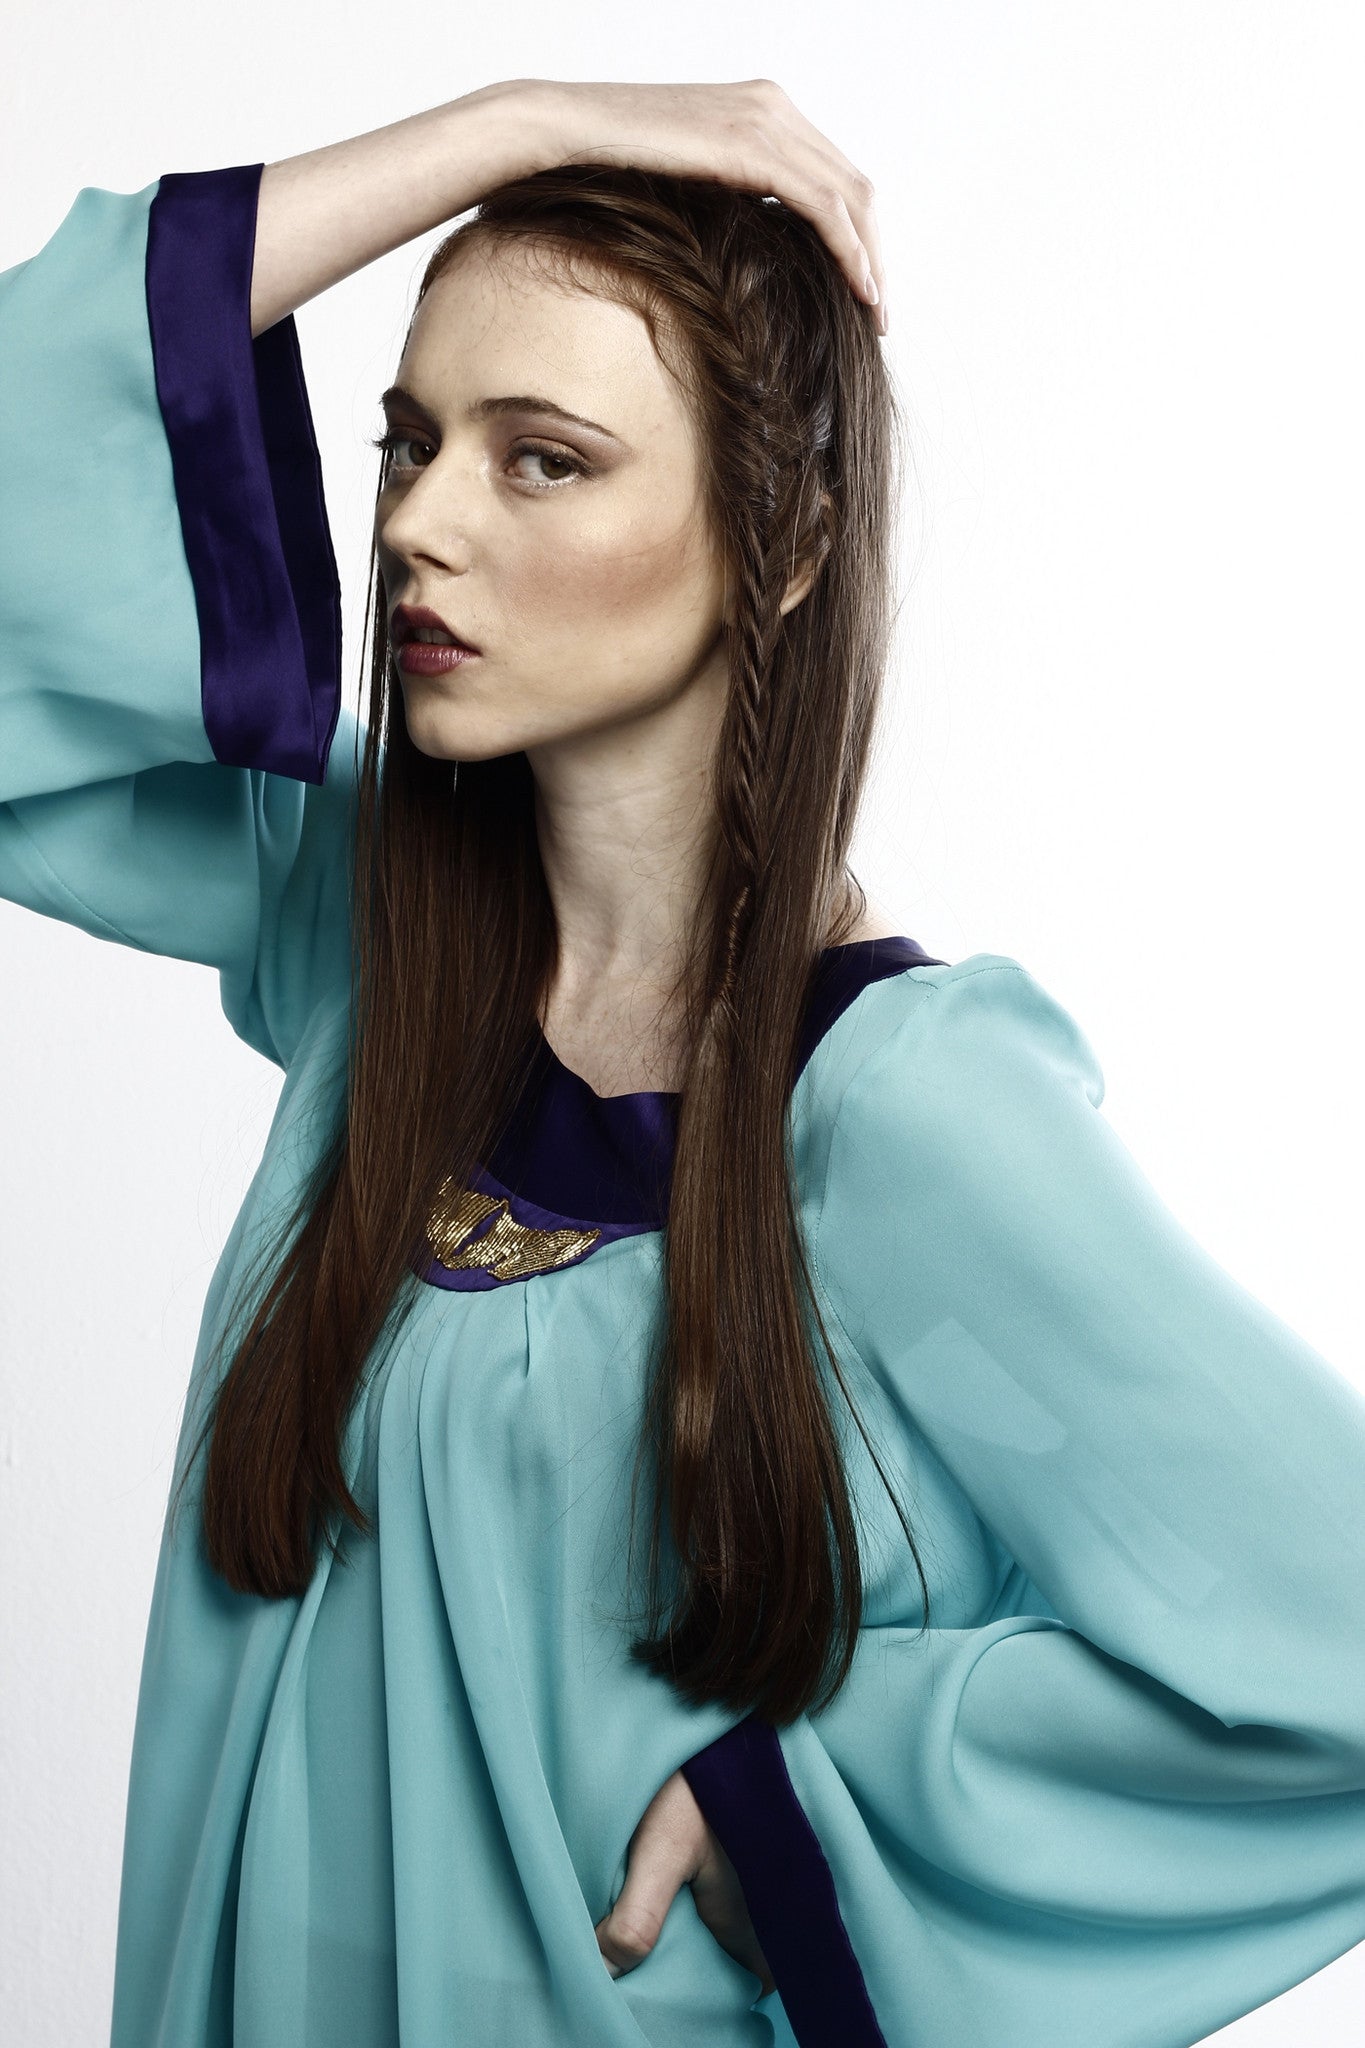 Silk blouse, color-blocked, long, blue, pleated, modest and elegant